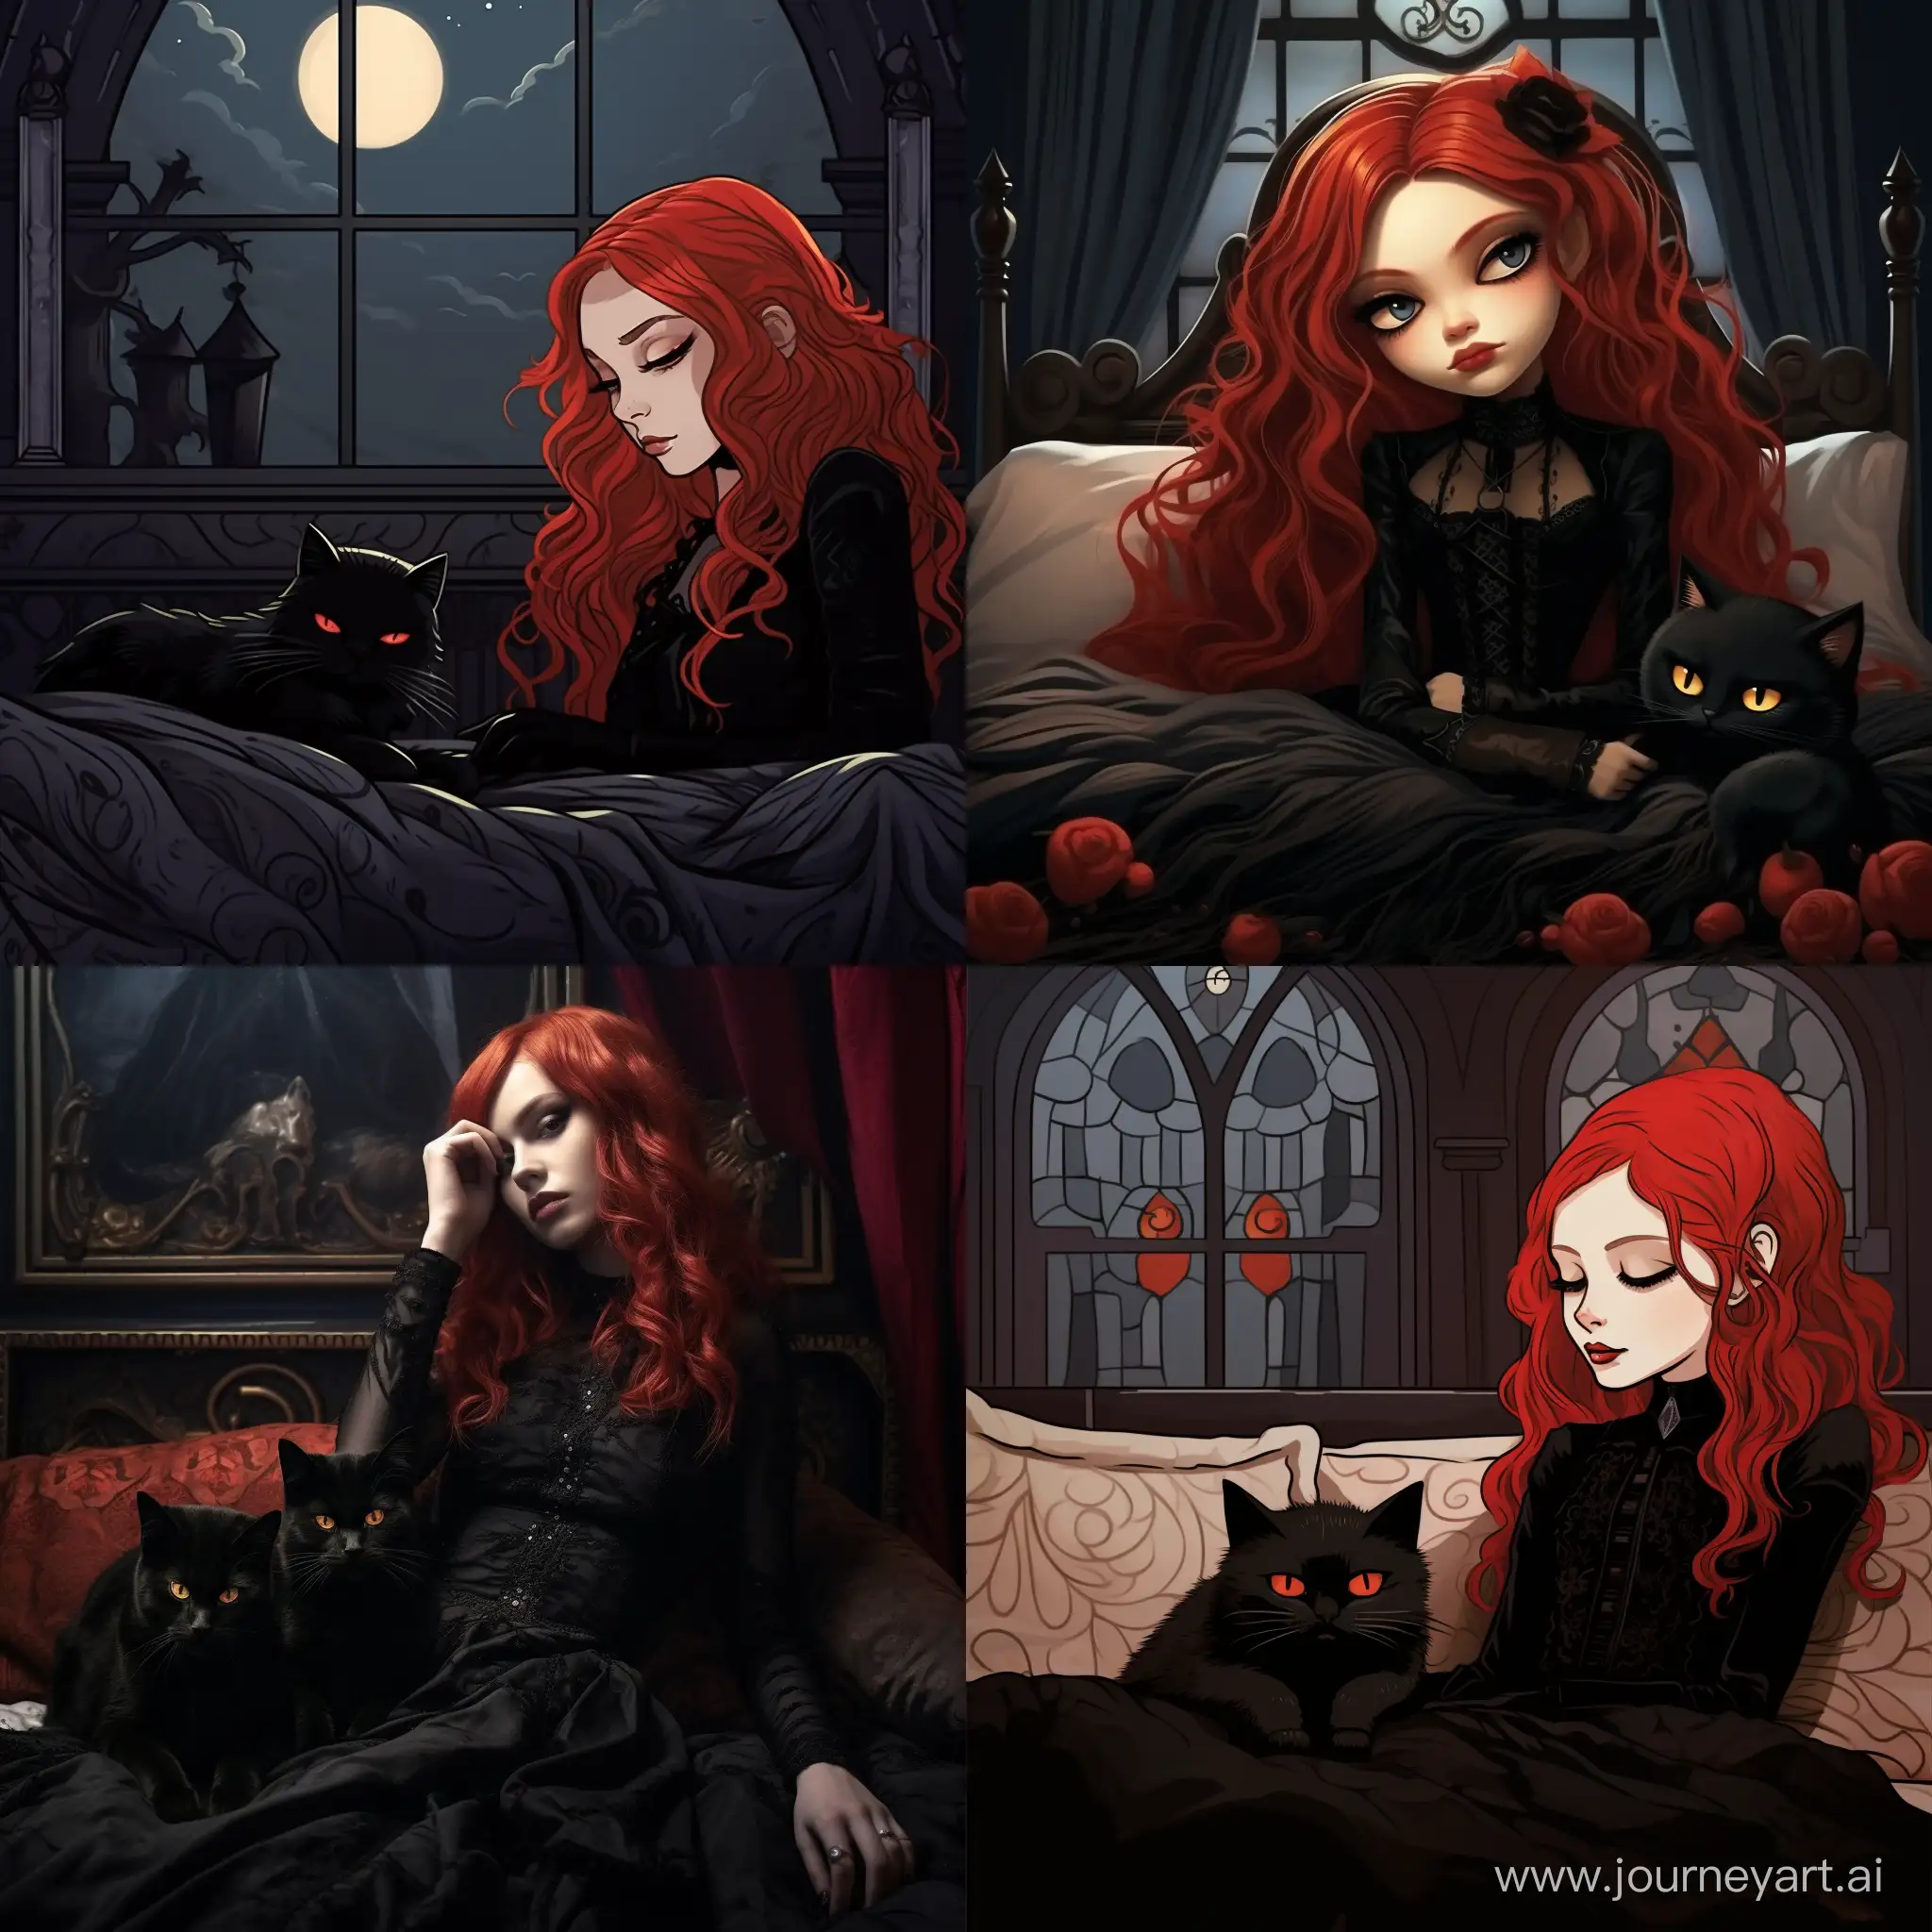 RedHaired-Gothic-Girl-Sleeping-Beside-a-GothicStyle-Cat